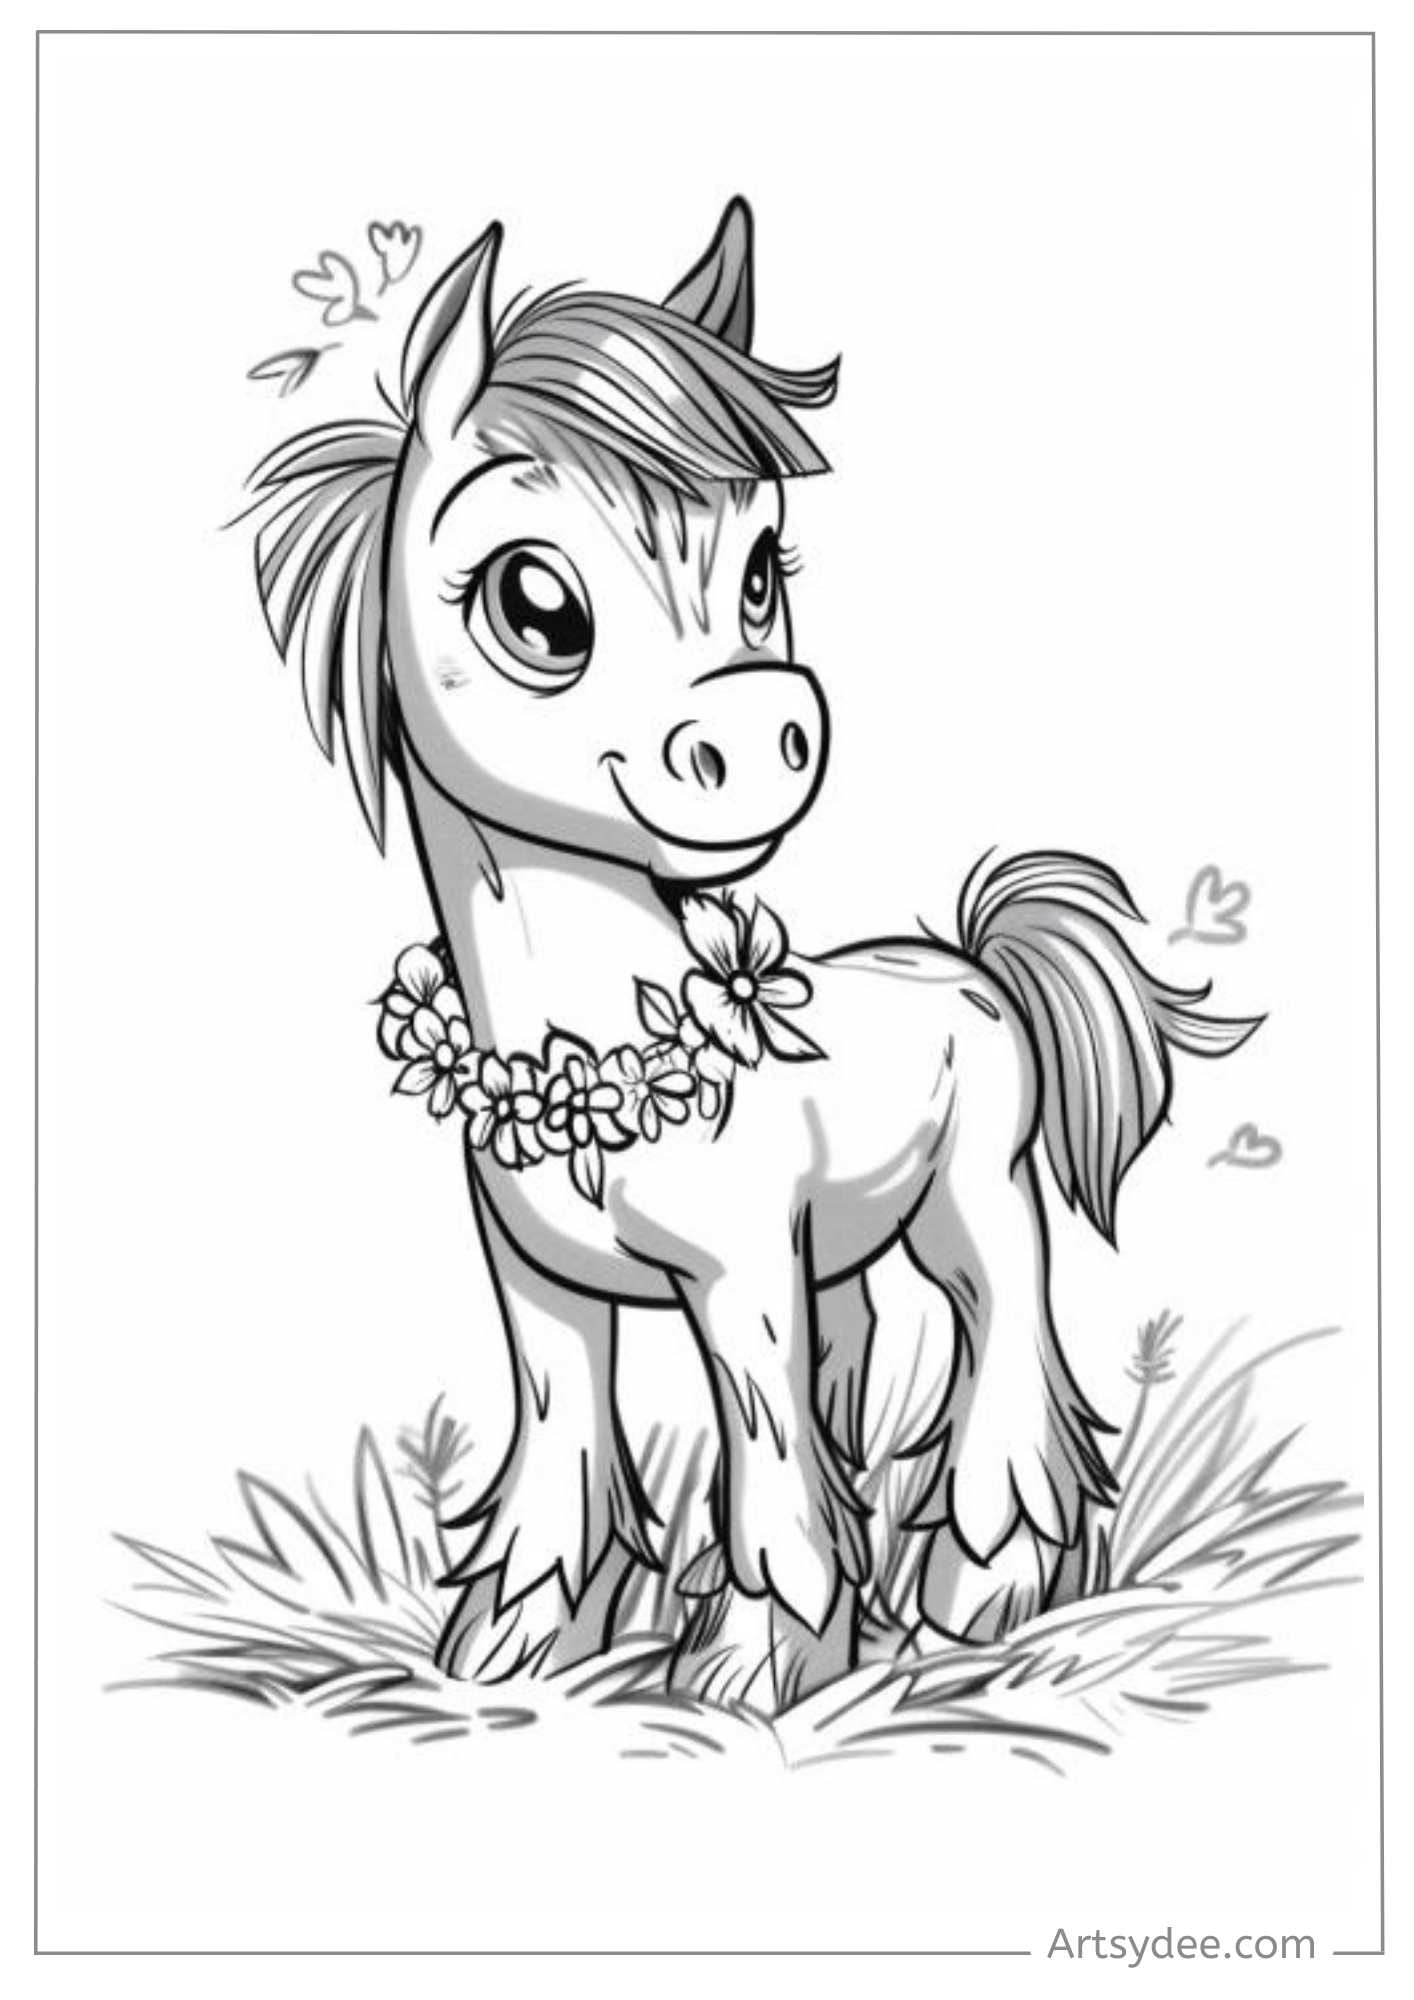 71+ Horse Coloring Pages: Free Printables for Coloring Fun! - Artsydee ...